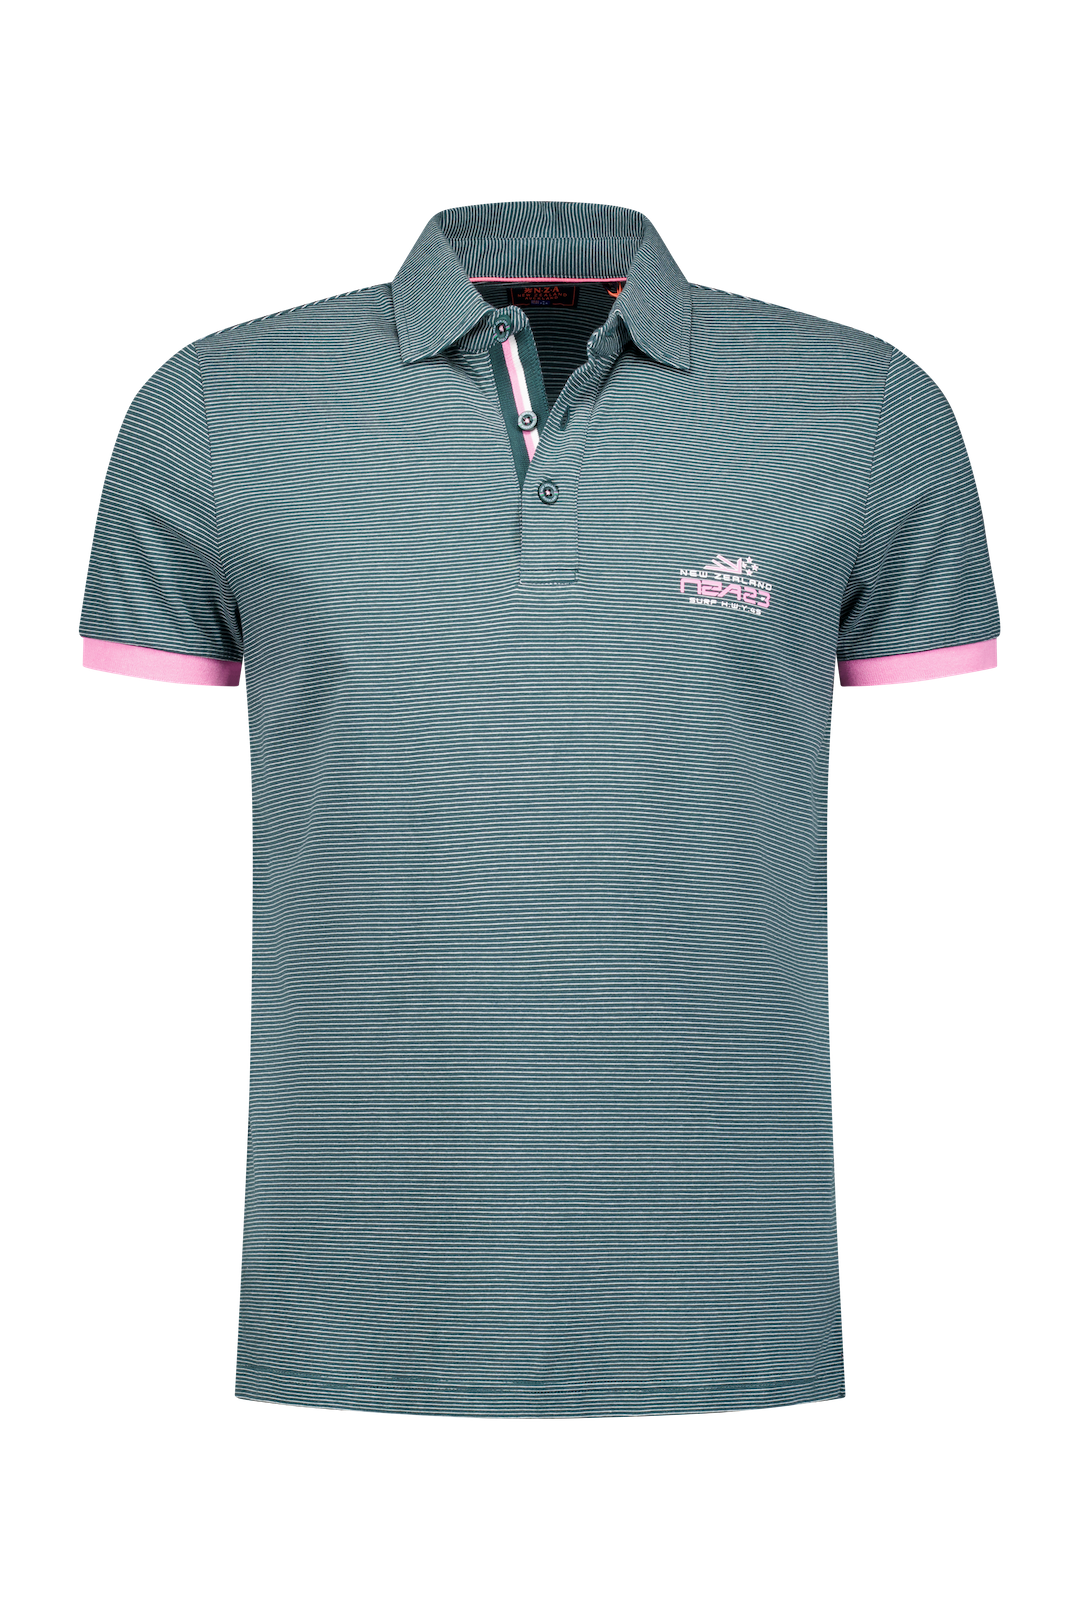 Green poloshirt with pink accents - Classic Green